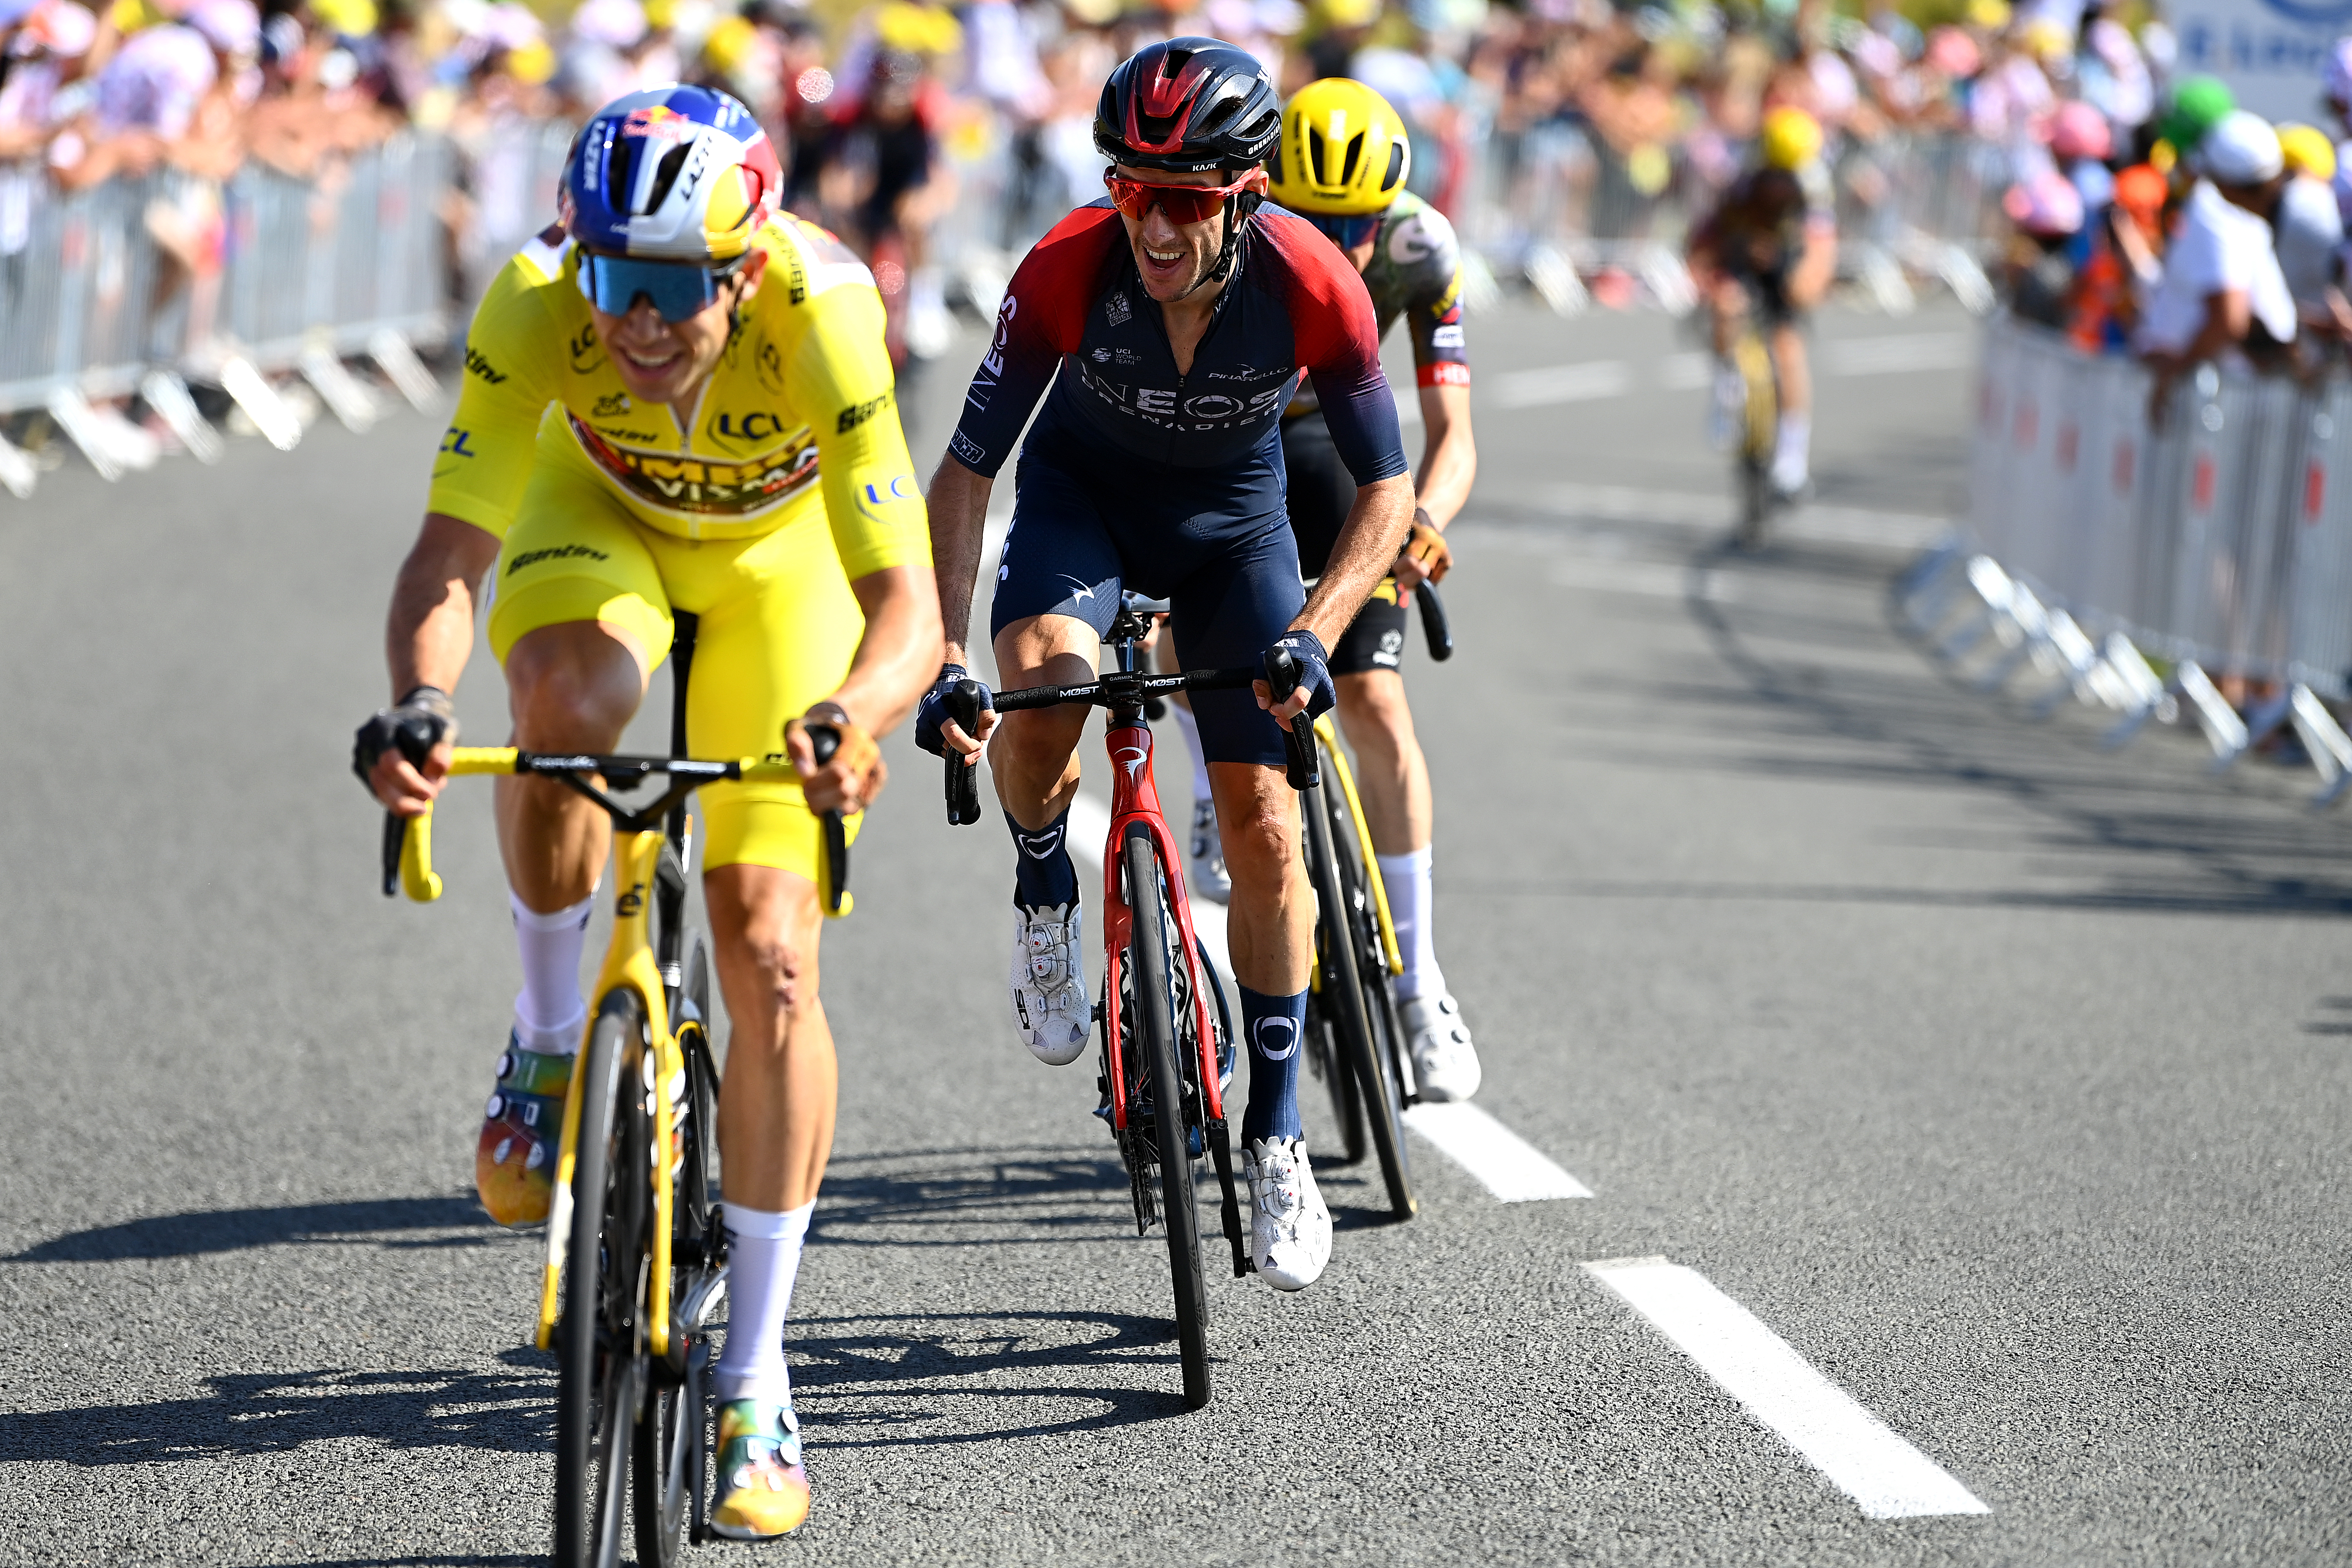 Wout Van Aert of Belgium and Team Jumbo - Visma Yellow Leader Jersey attacks in the breakaway ahead of Adam Yates of United Kingdom and Team INEOS Grenadiers during the 109th Tour de France 2022, Stage 4 a 171,5km stage from Dunkerque to Calais.